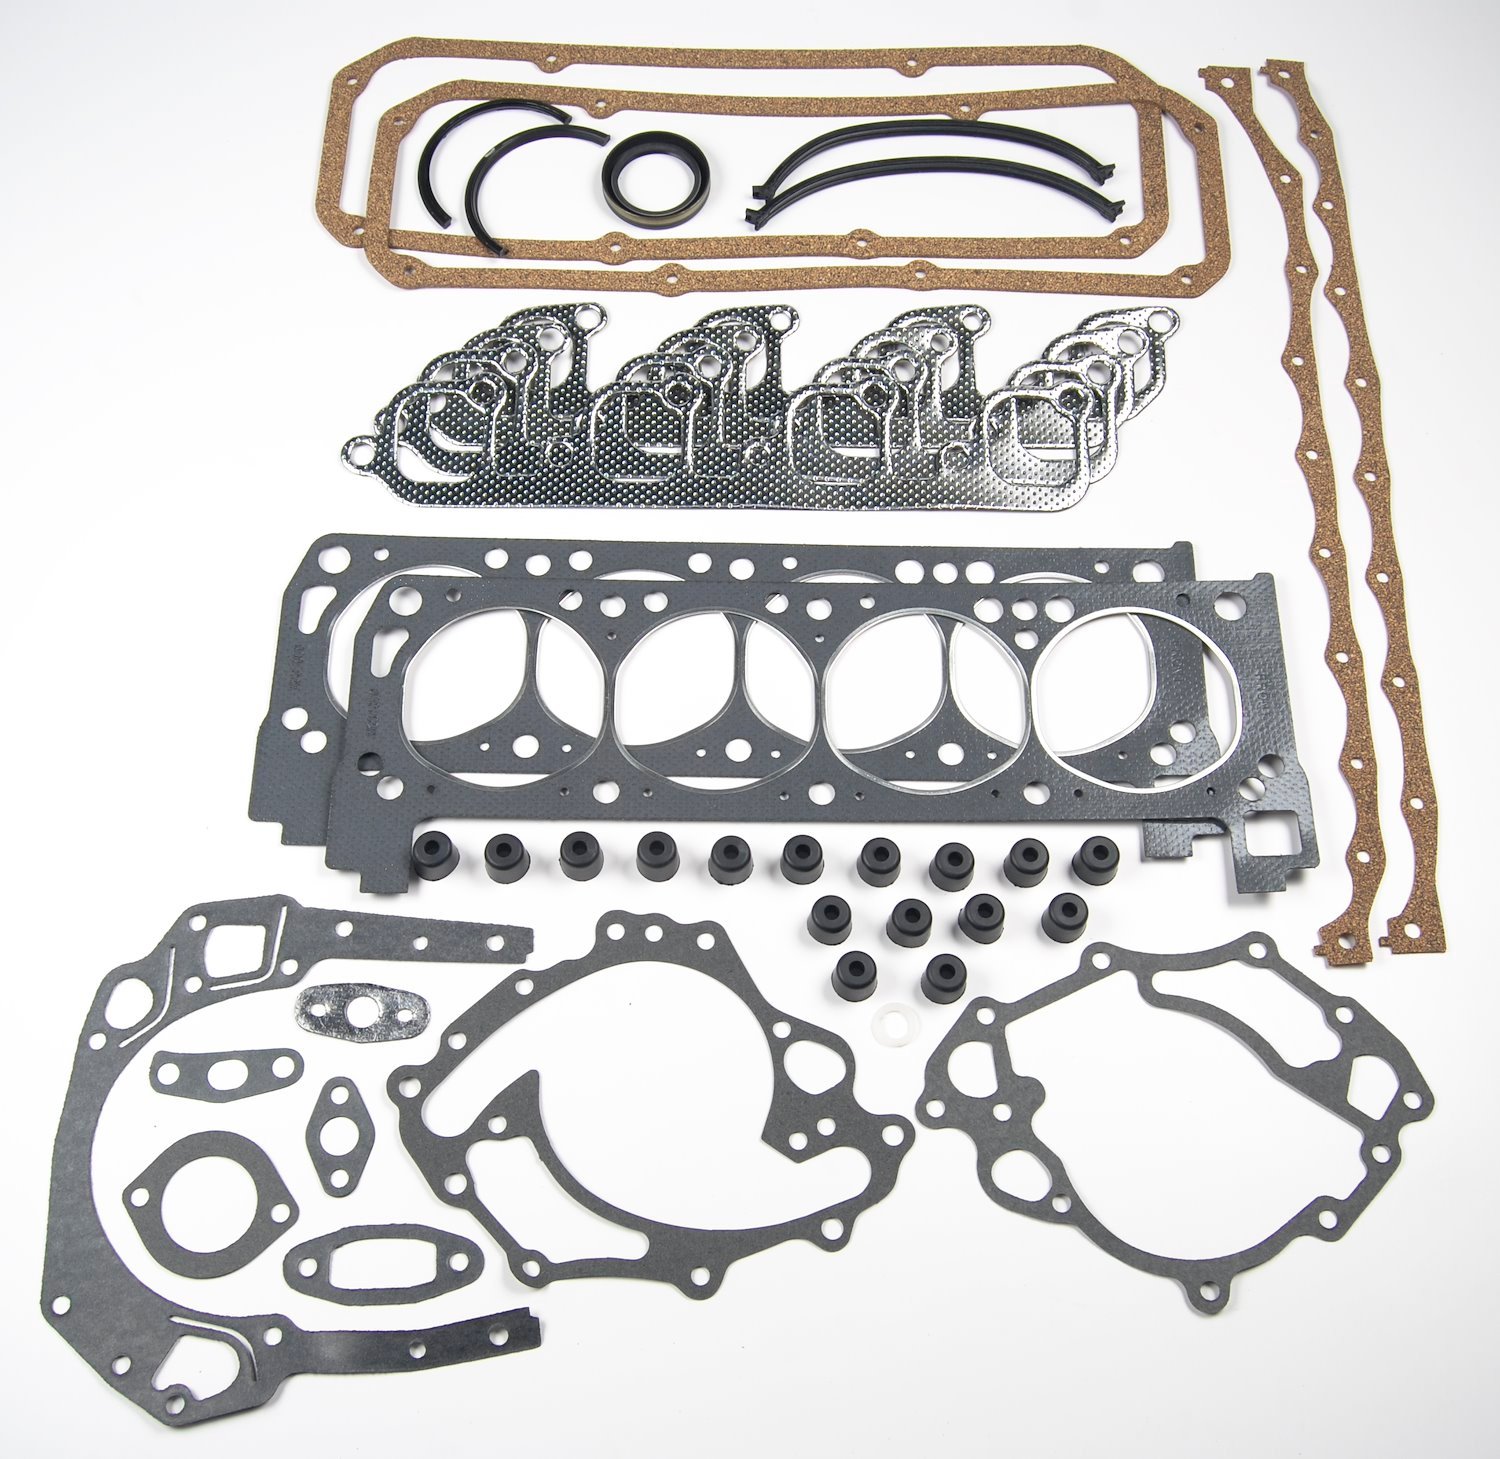 Engine Gasket Kit for 1970-1982 Ford 351C, 351M, and 400 Engines